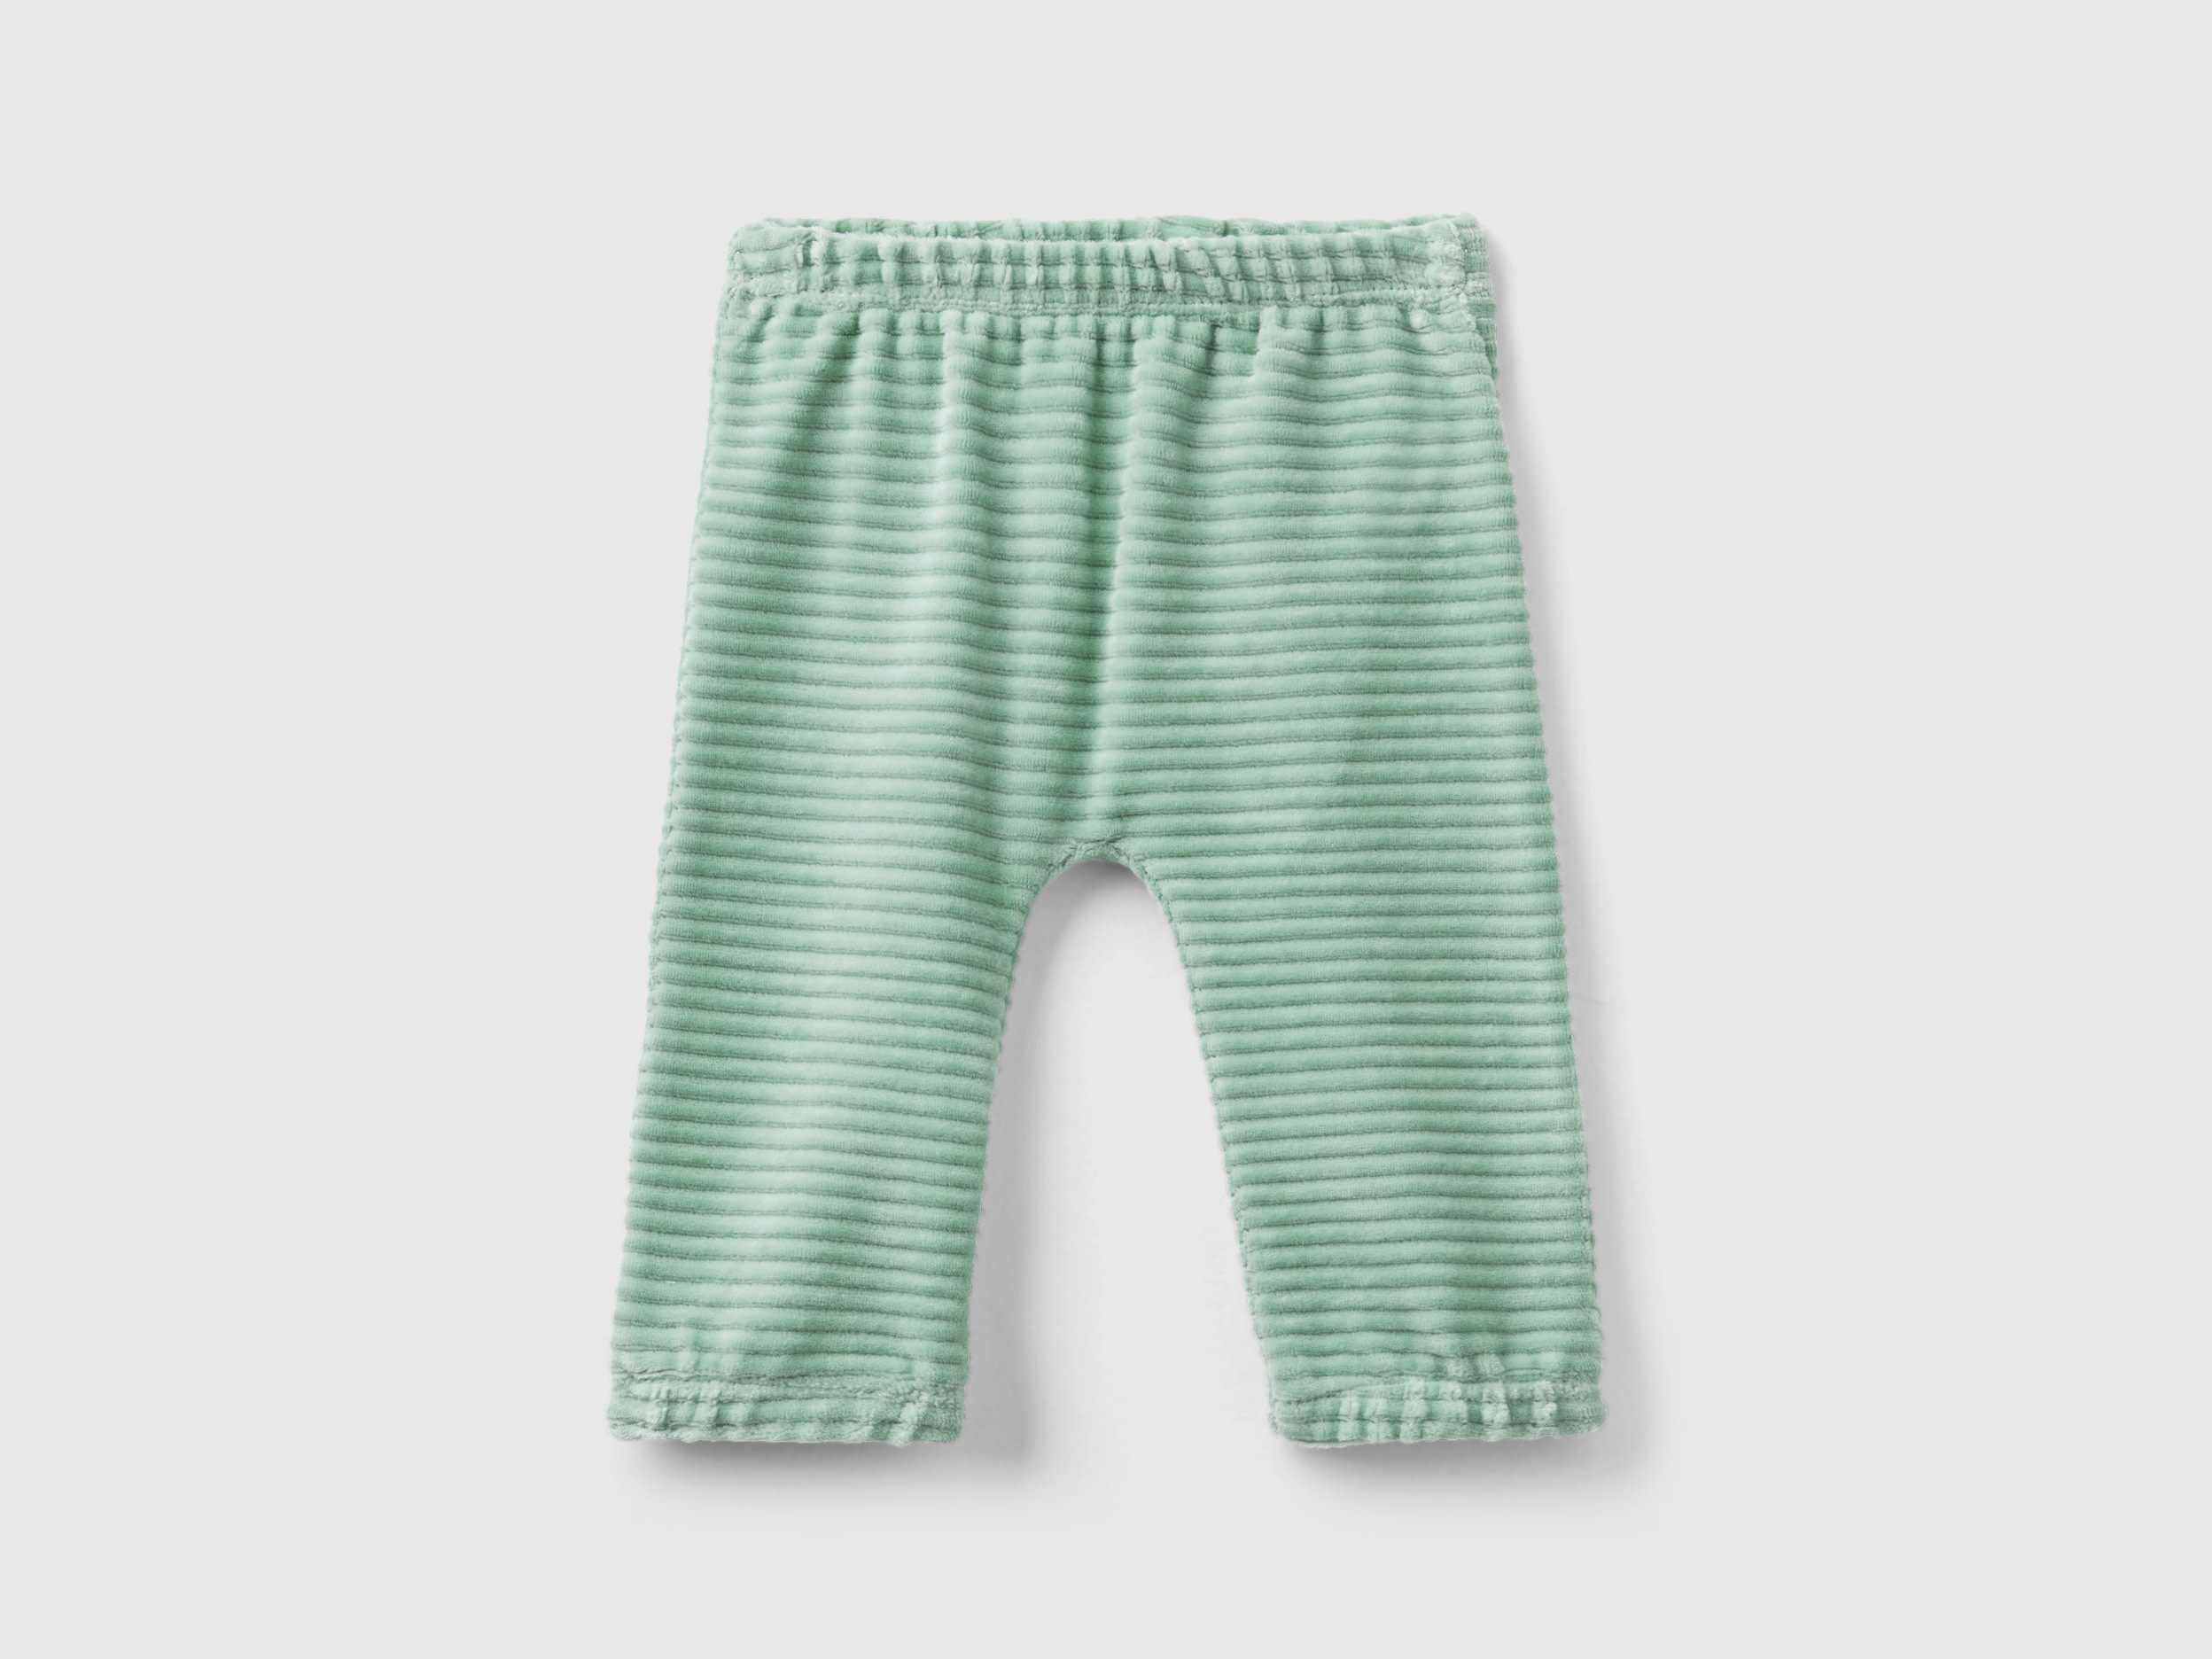 Benetton, Chenille Trousers With Embroidery, size 3-6, Green, Kids